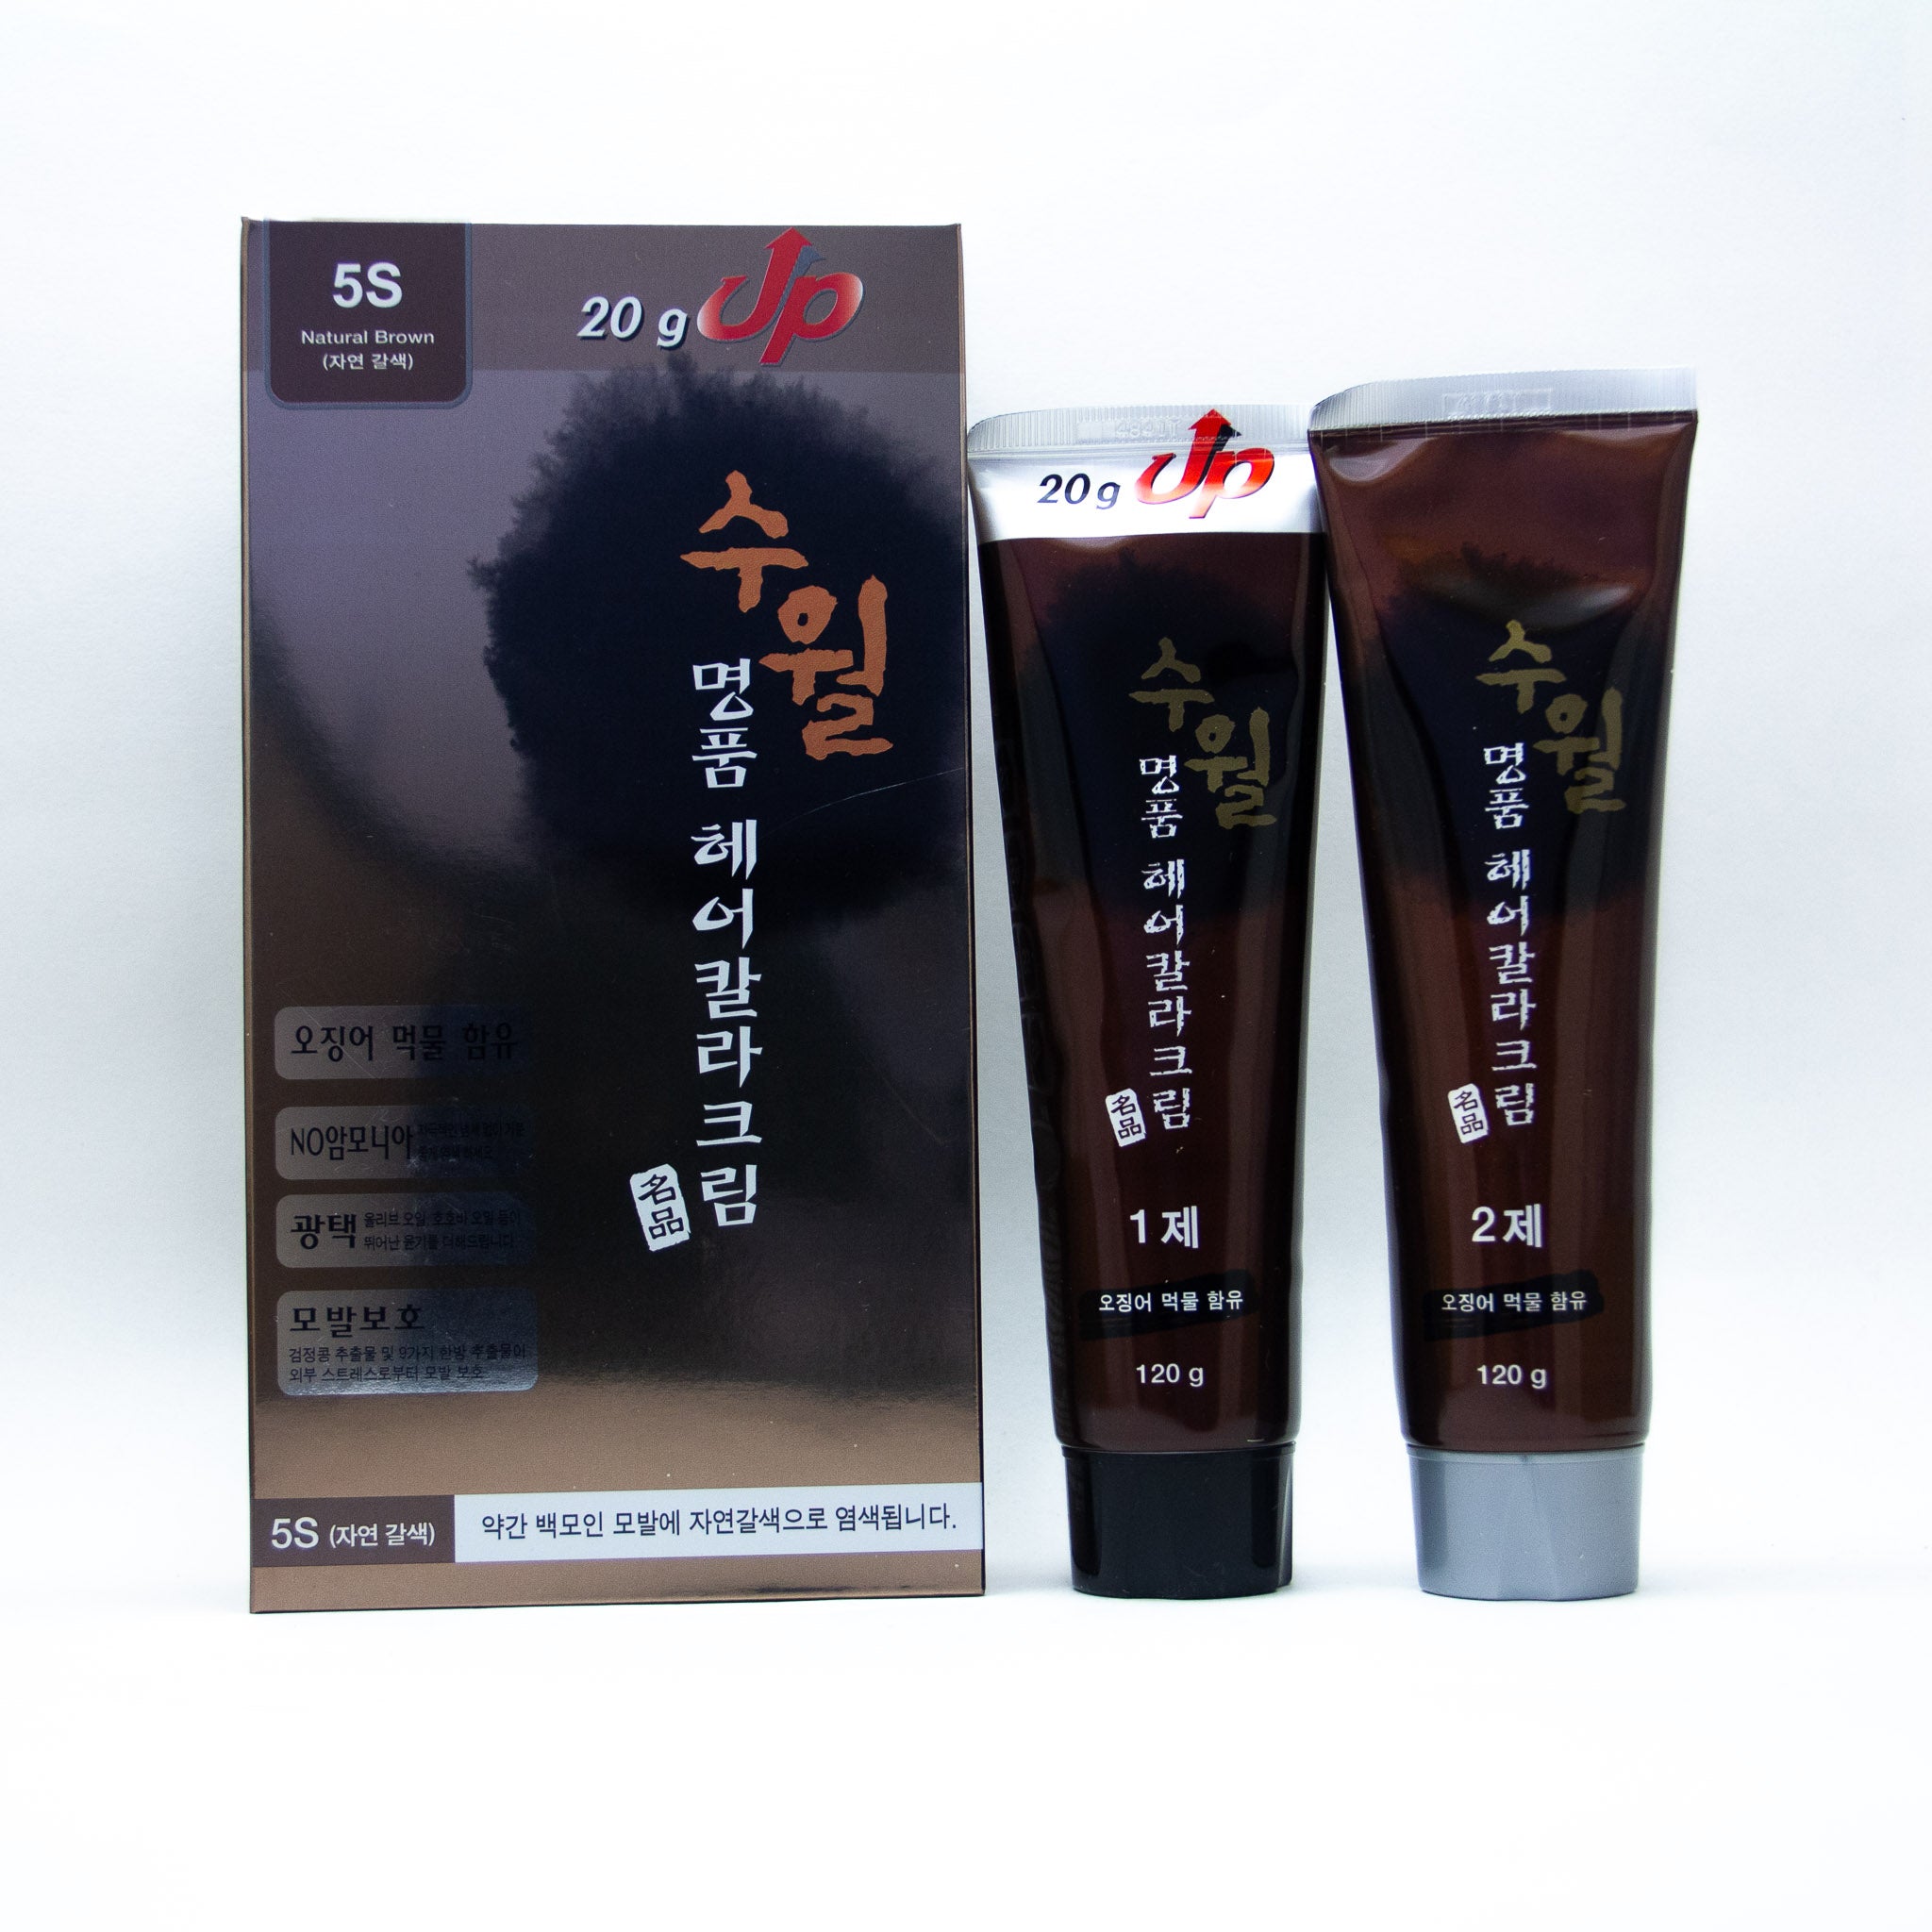 Su Wall Luxury Hair Color Cream (5S Natural Brown): Ammonia-free cream color hair dye formulated with oriental medicinal extracts, olive oil, and jojoba oil